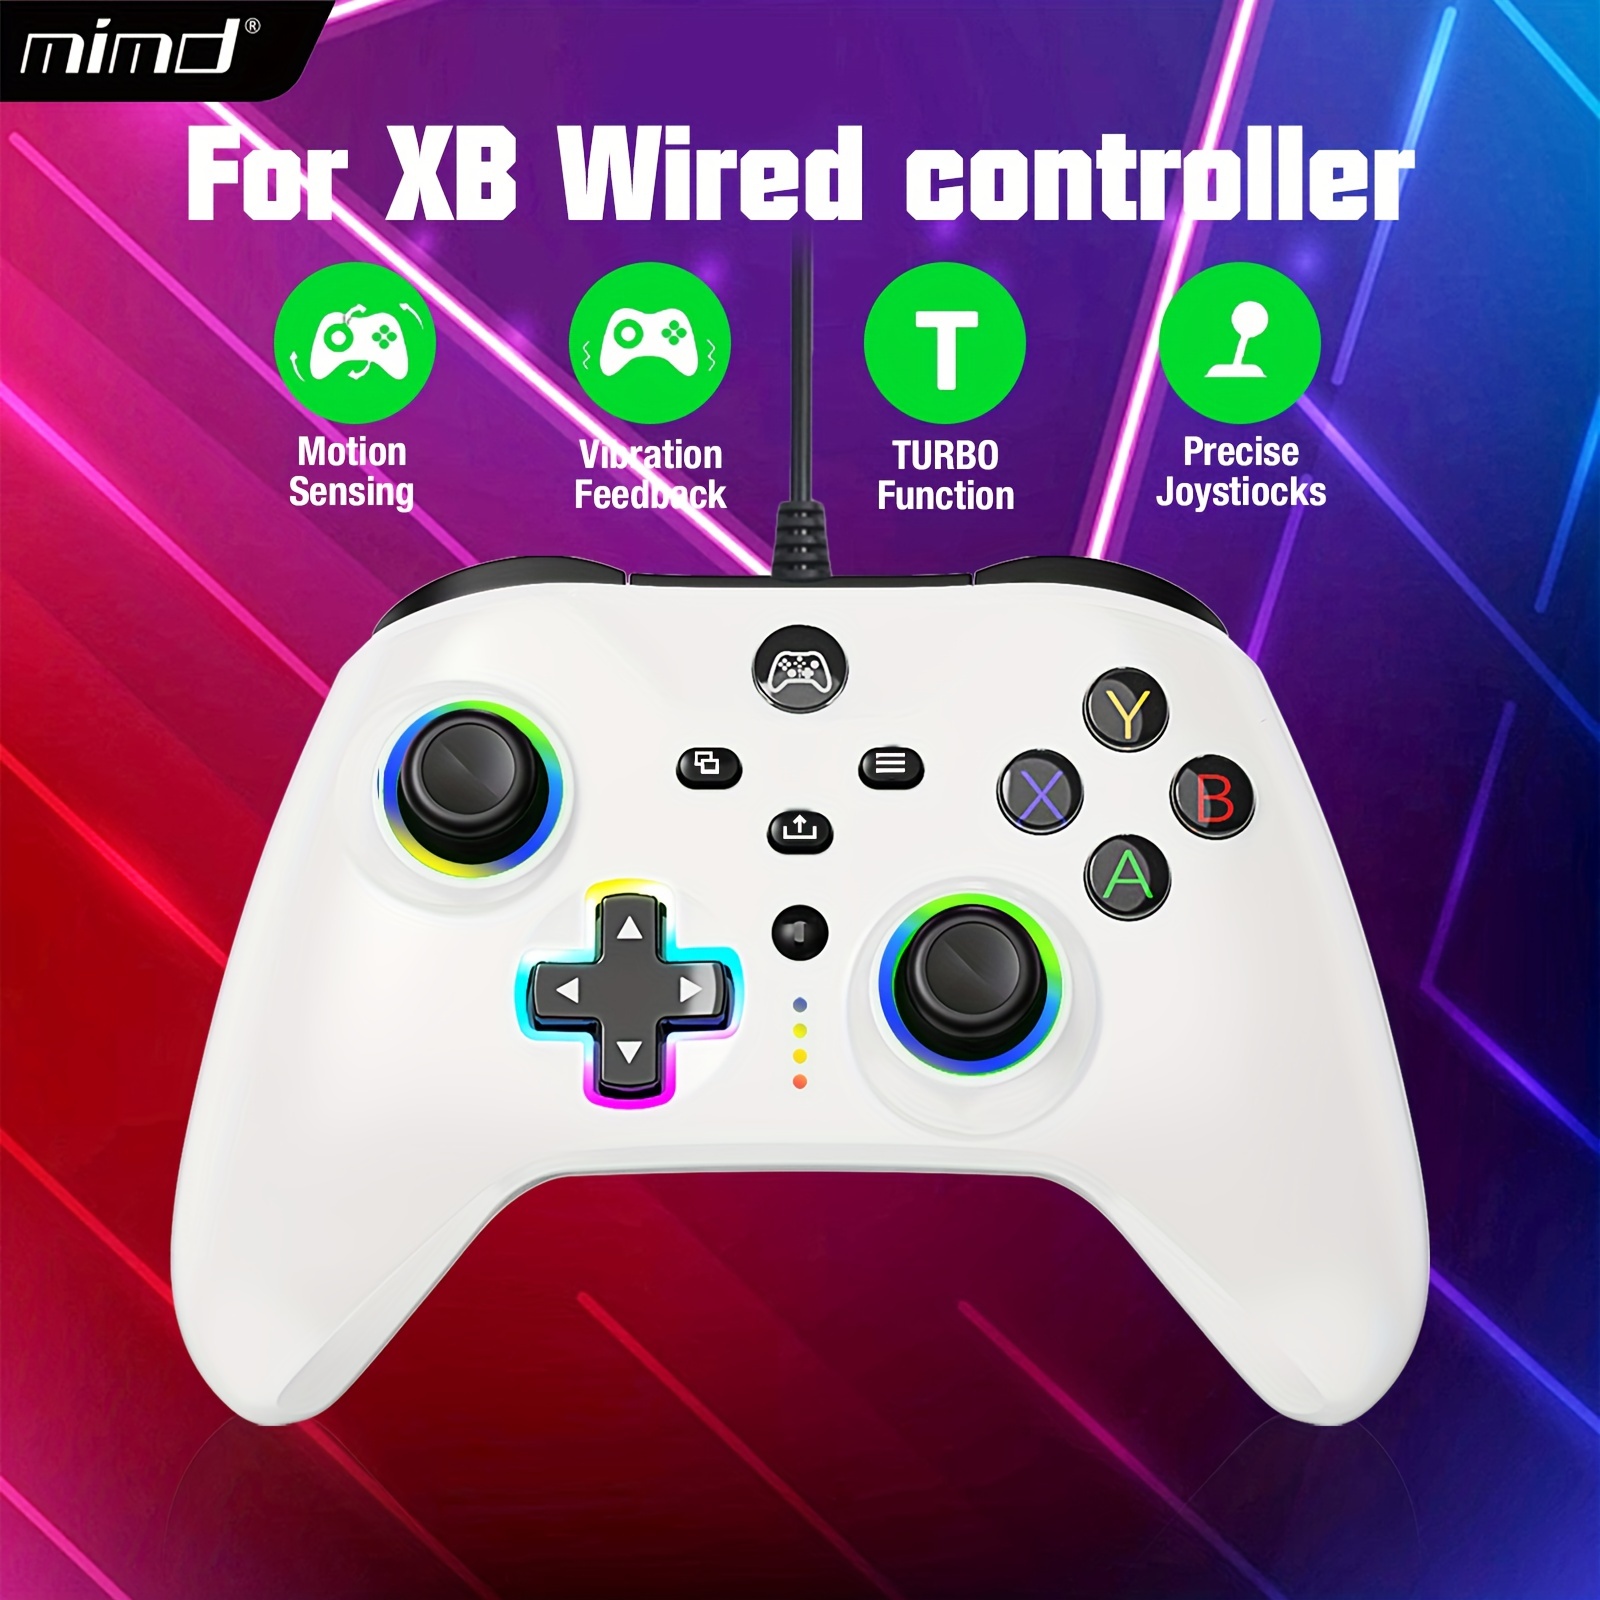 Manette Xbox One-S-X-PC SPECTRA Lumineuse Noire LED RGB EDITION